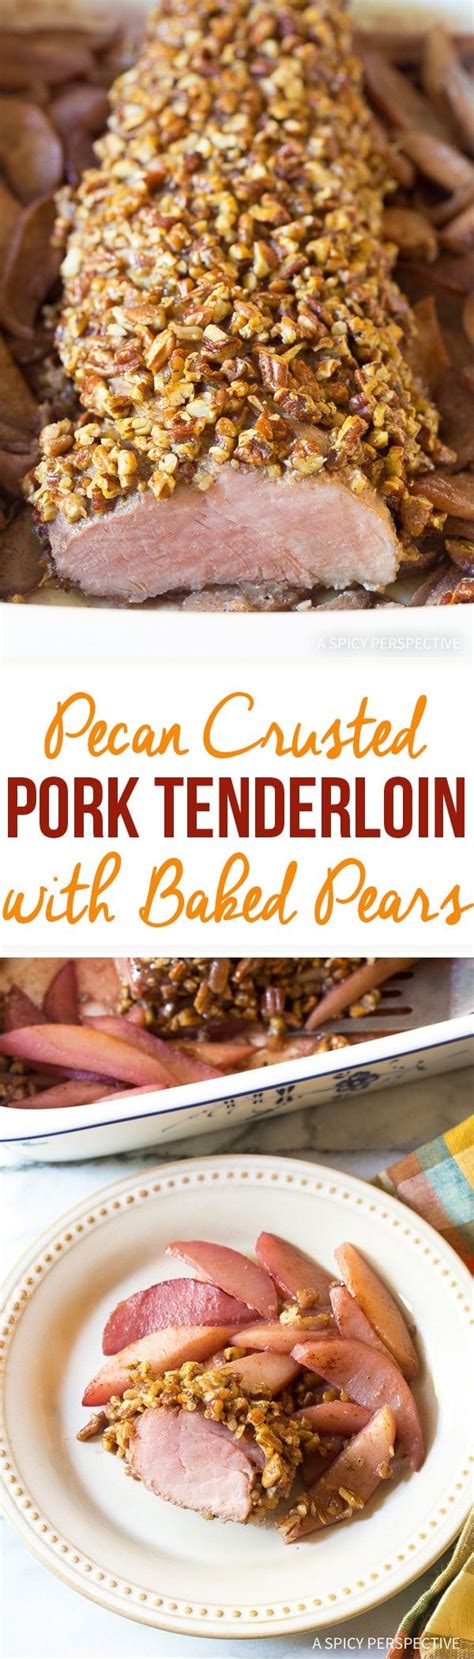 A side dish to go with your easy christmas dinner. Candied Pecan Crusted Pork Tenderloin with Baked Pears ...